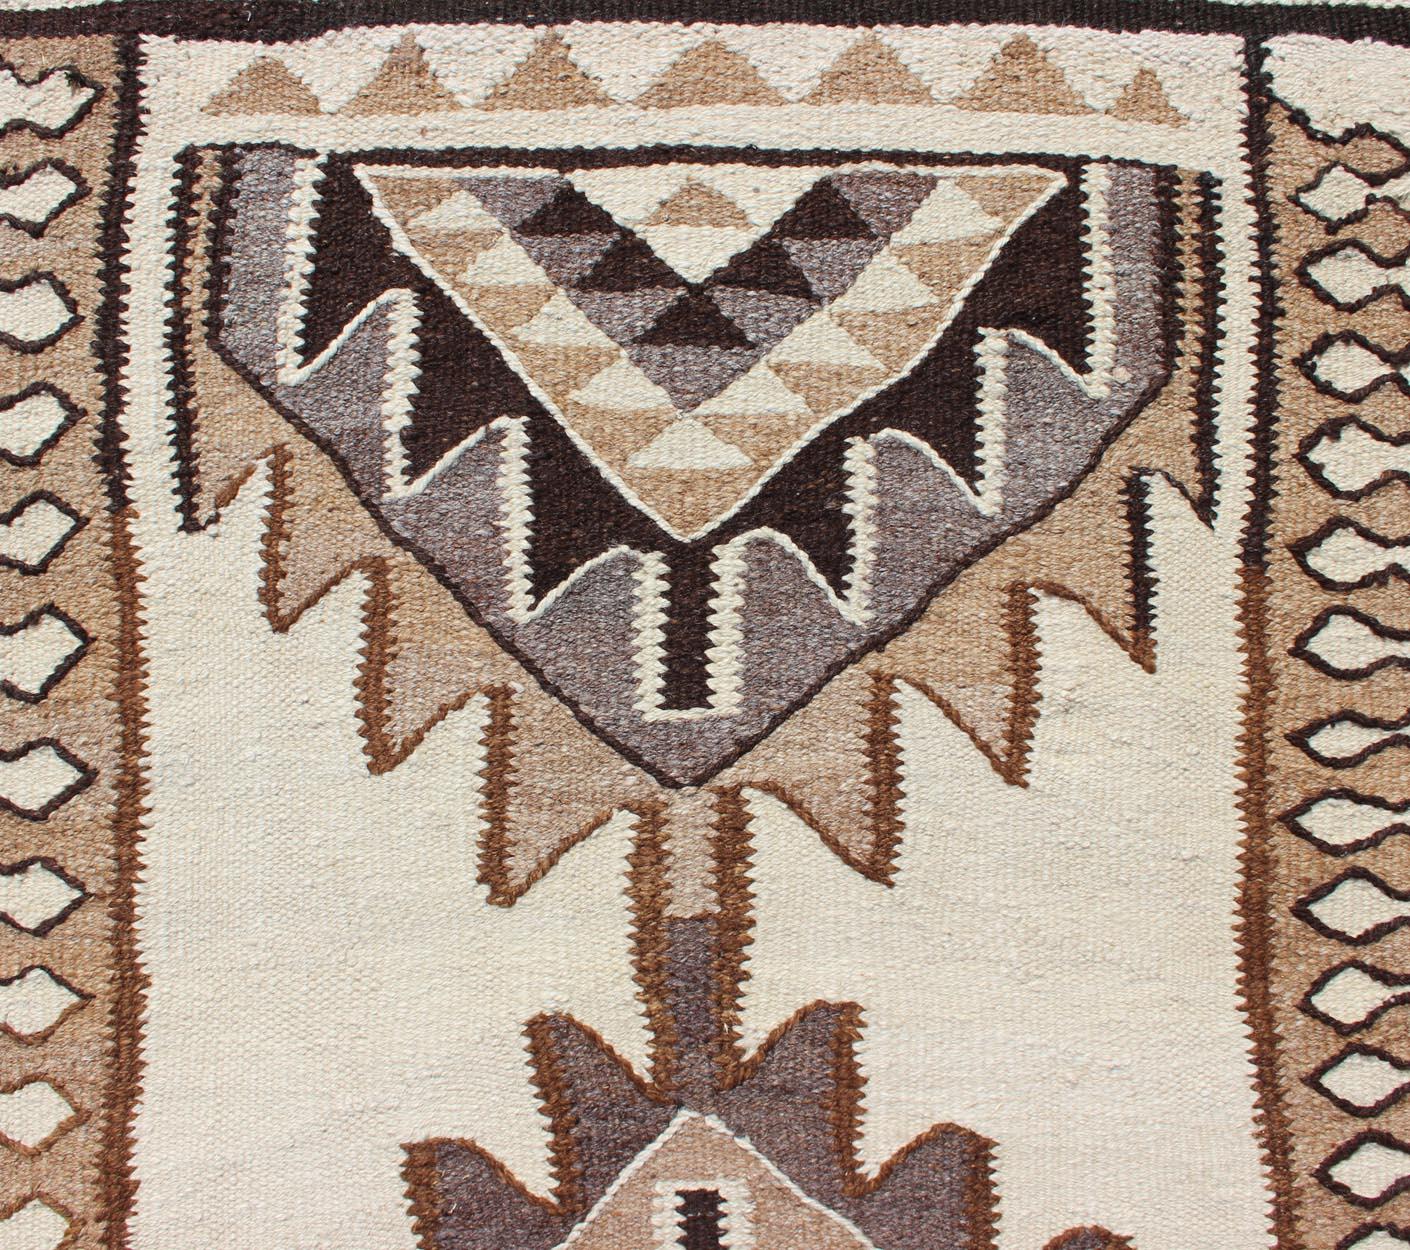 Vintage Turkish Kilim Runner with Tribal Medallions in Shades of Brown and Cream For Sale 2